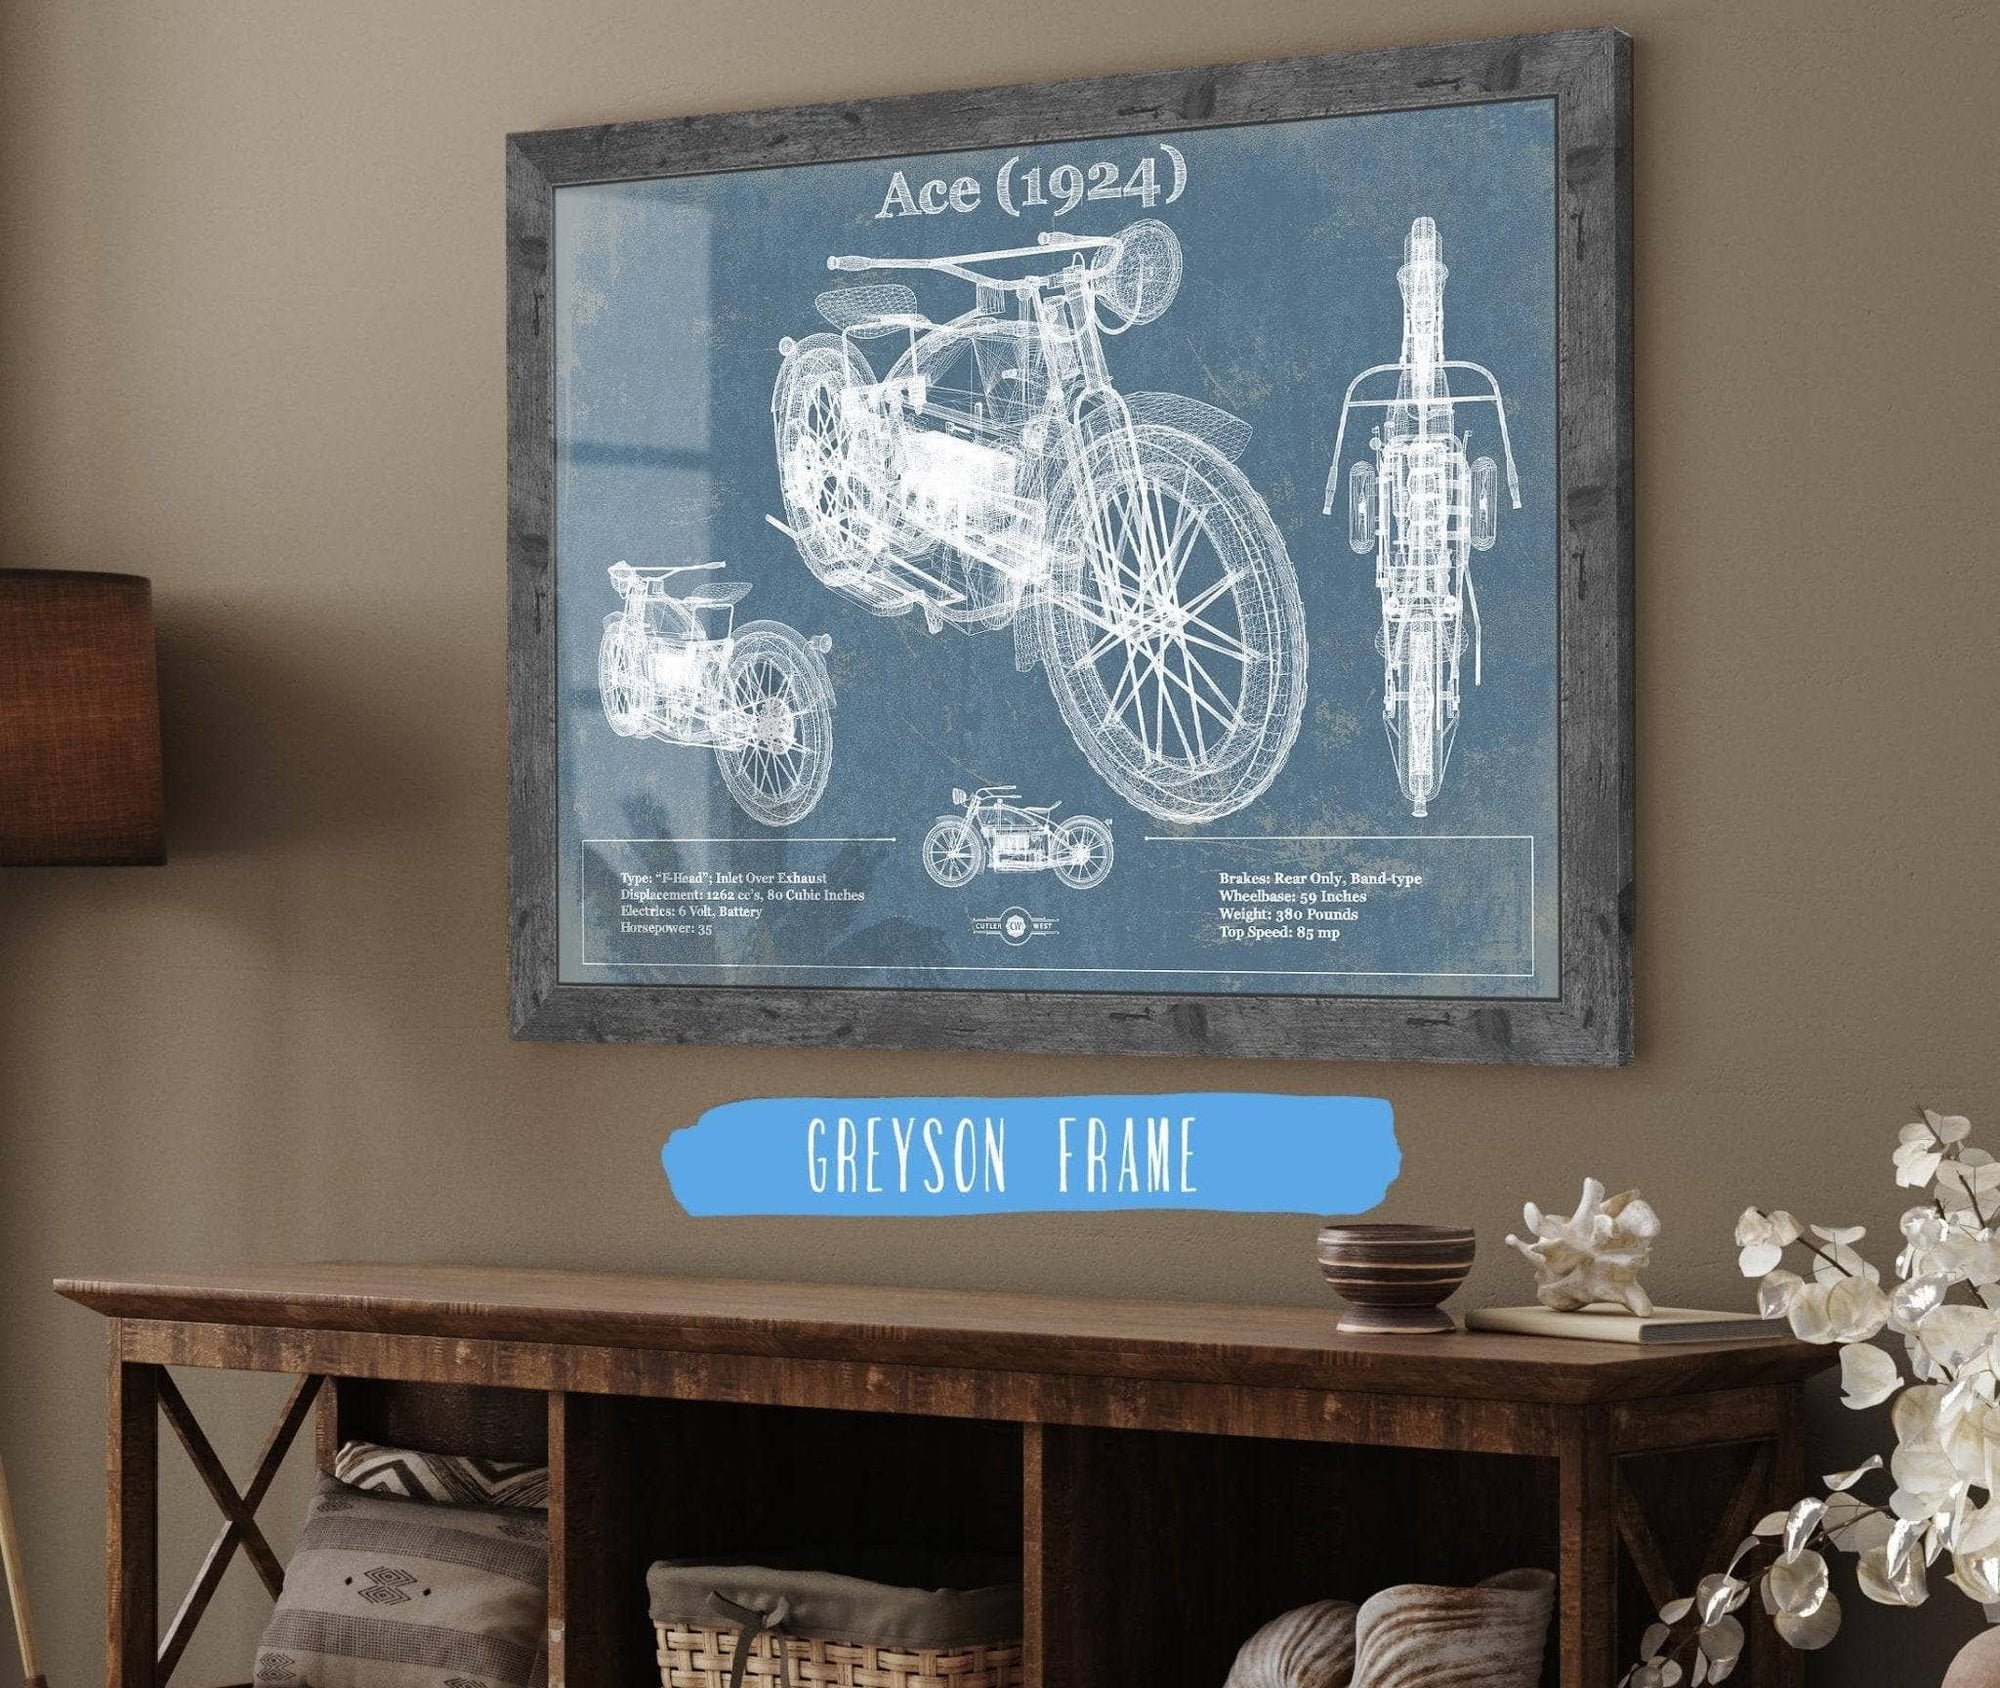 Cutler West Vehicle Collection 14" x 11" / Greyson Frame Ace (1924) Blueprint Motorcycle Patent Print 833110074_38910